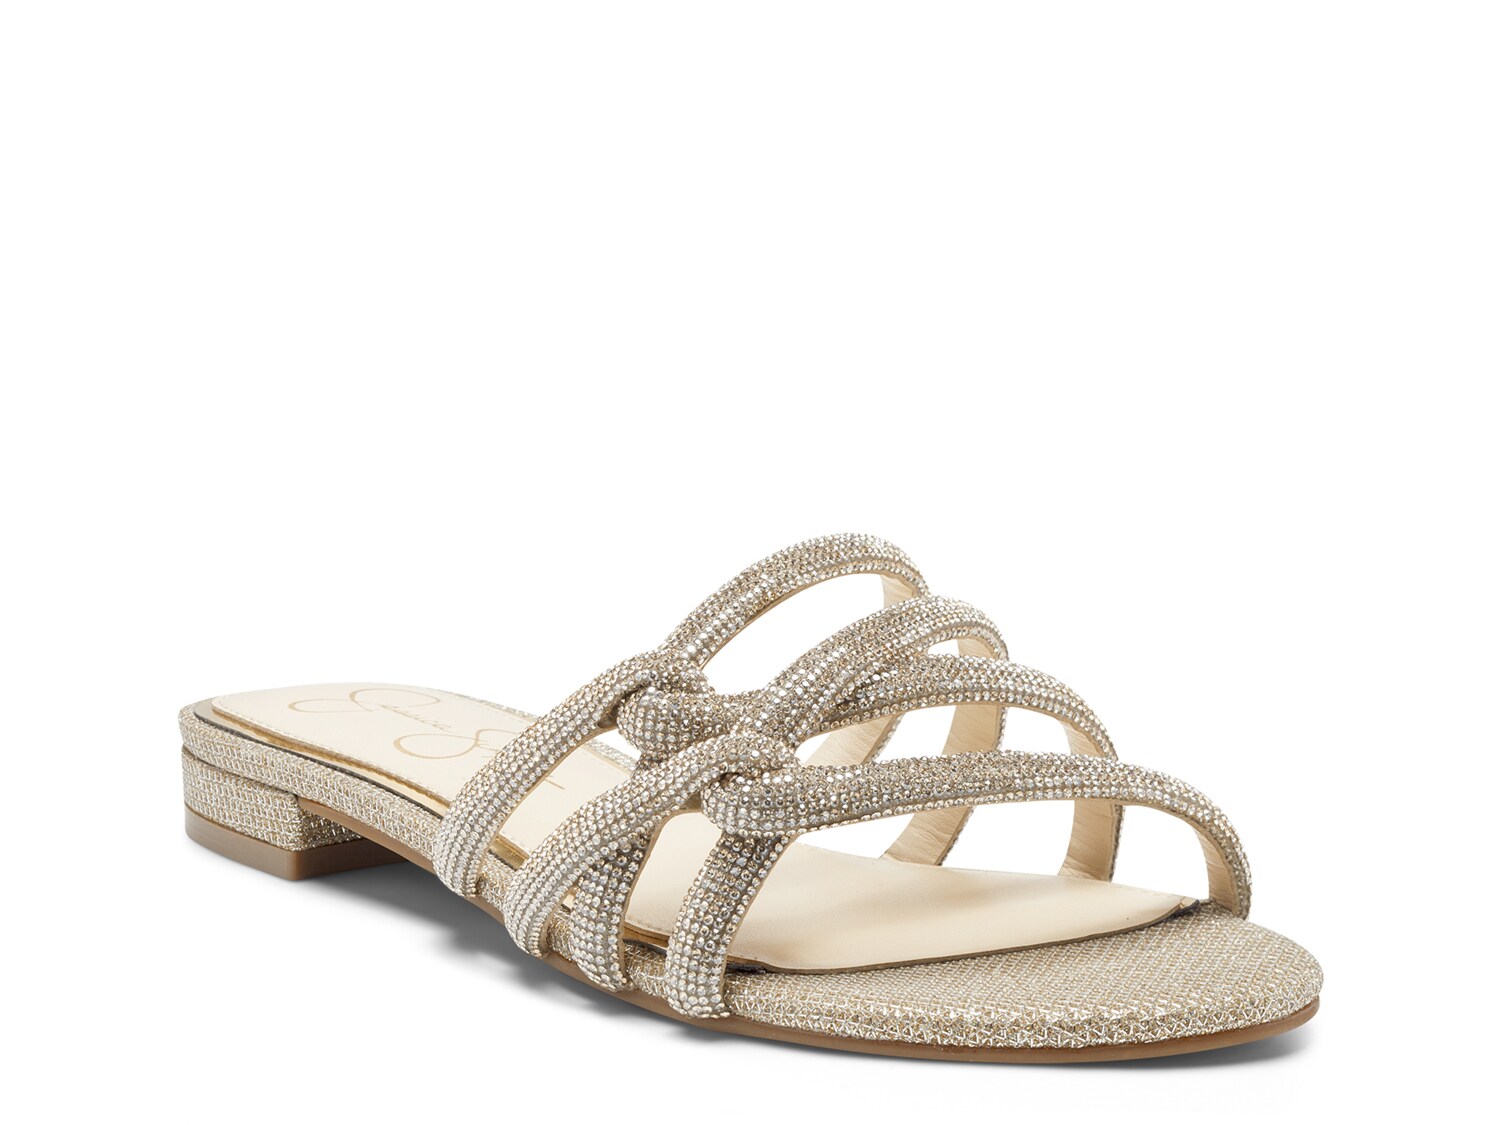 Jessica Simpson Aixel Slide Sandal - Free Shipping | DSW